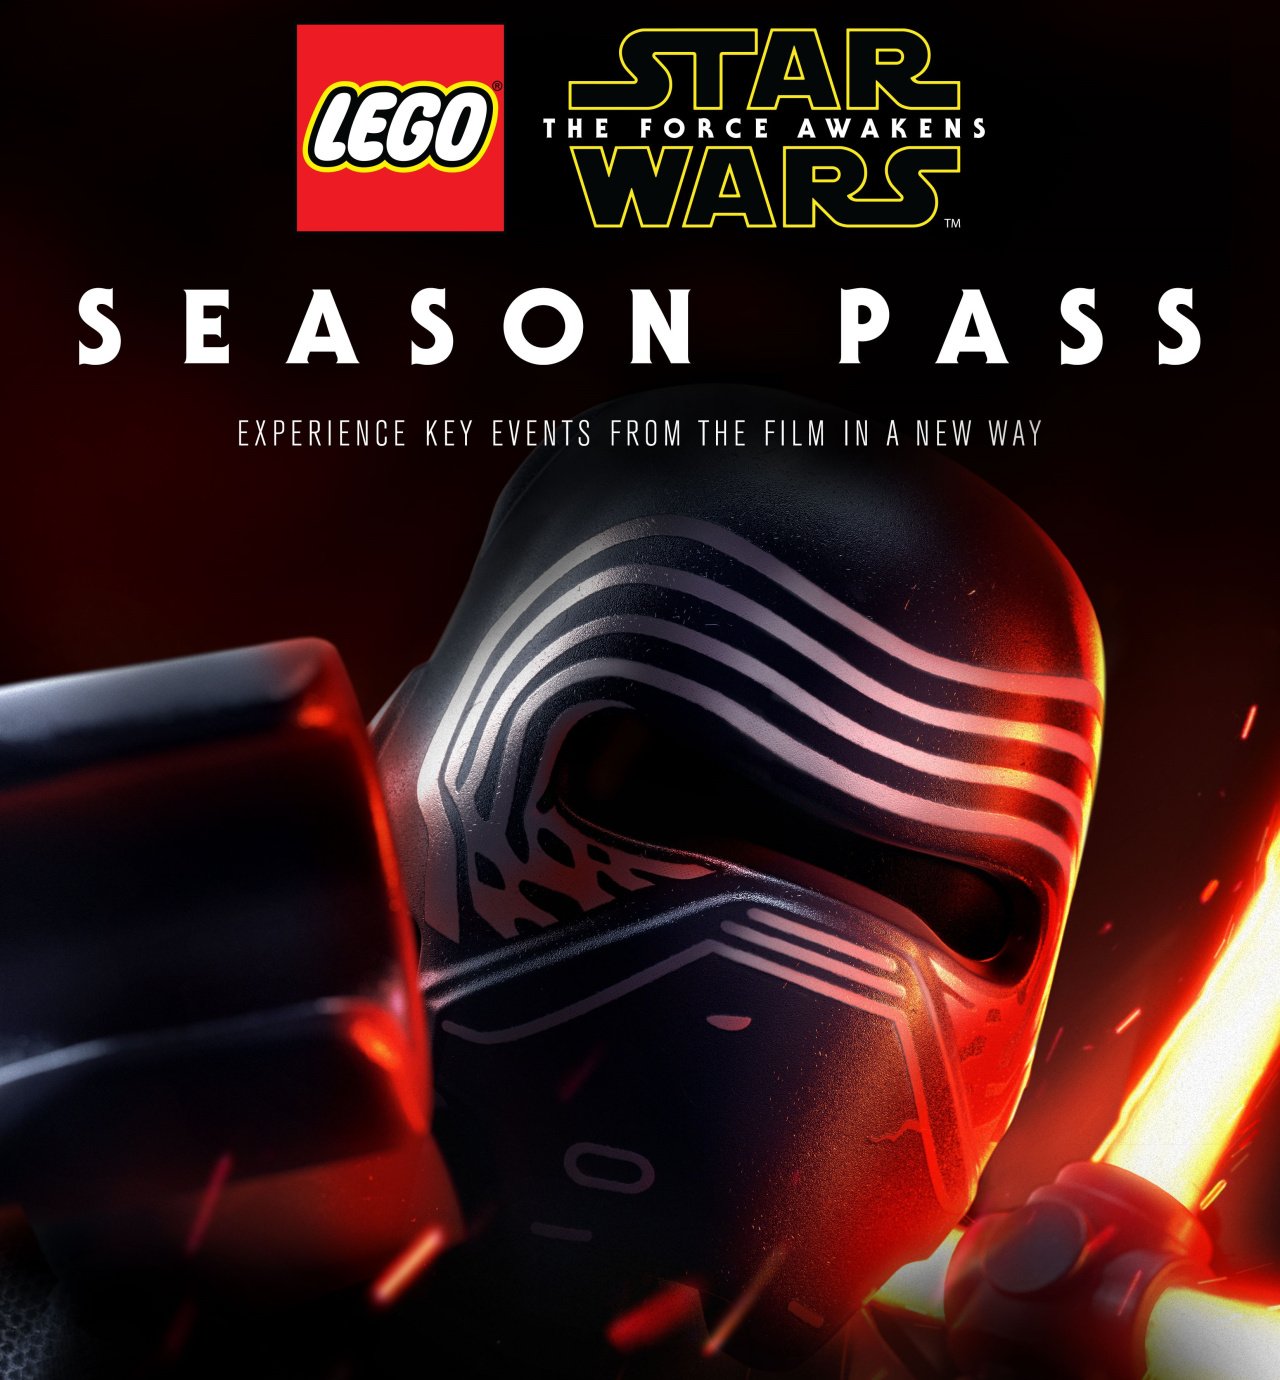 LEGO Star Wars: The Force Awakens Neat DLC, Yet Not Listed for Wii U | Nintendo Life